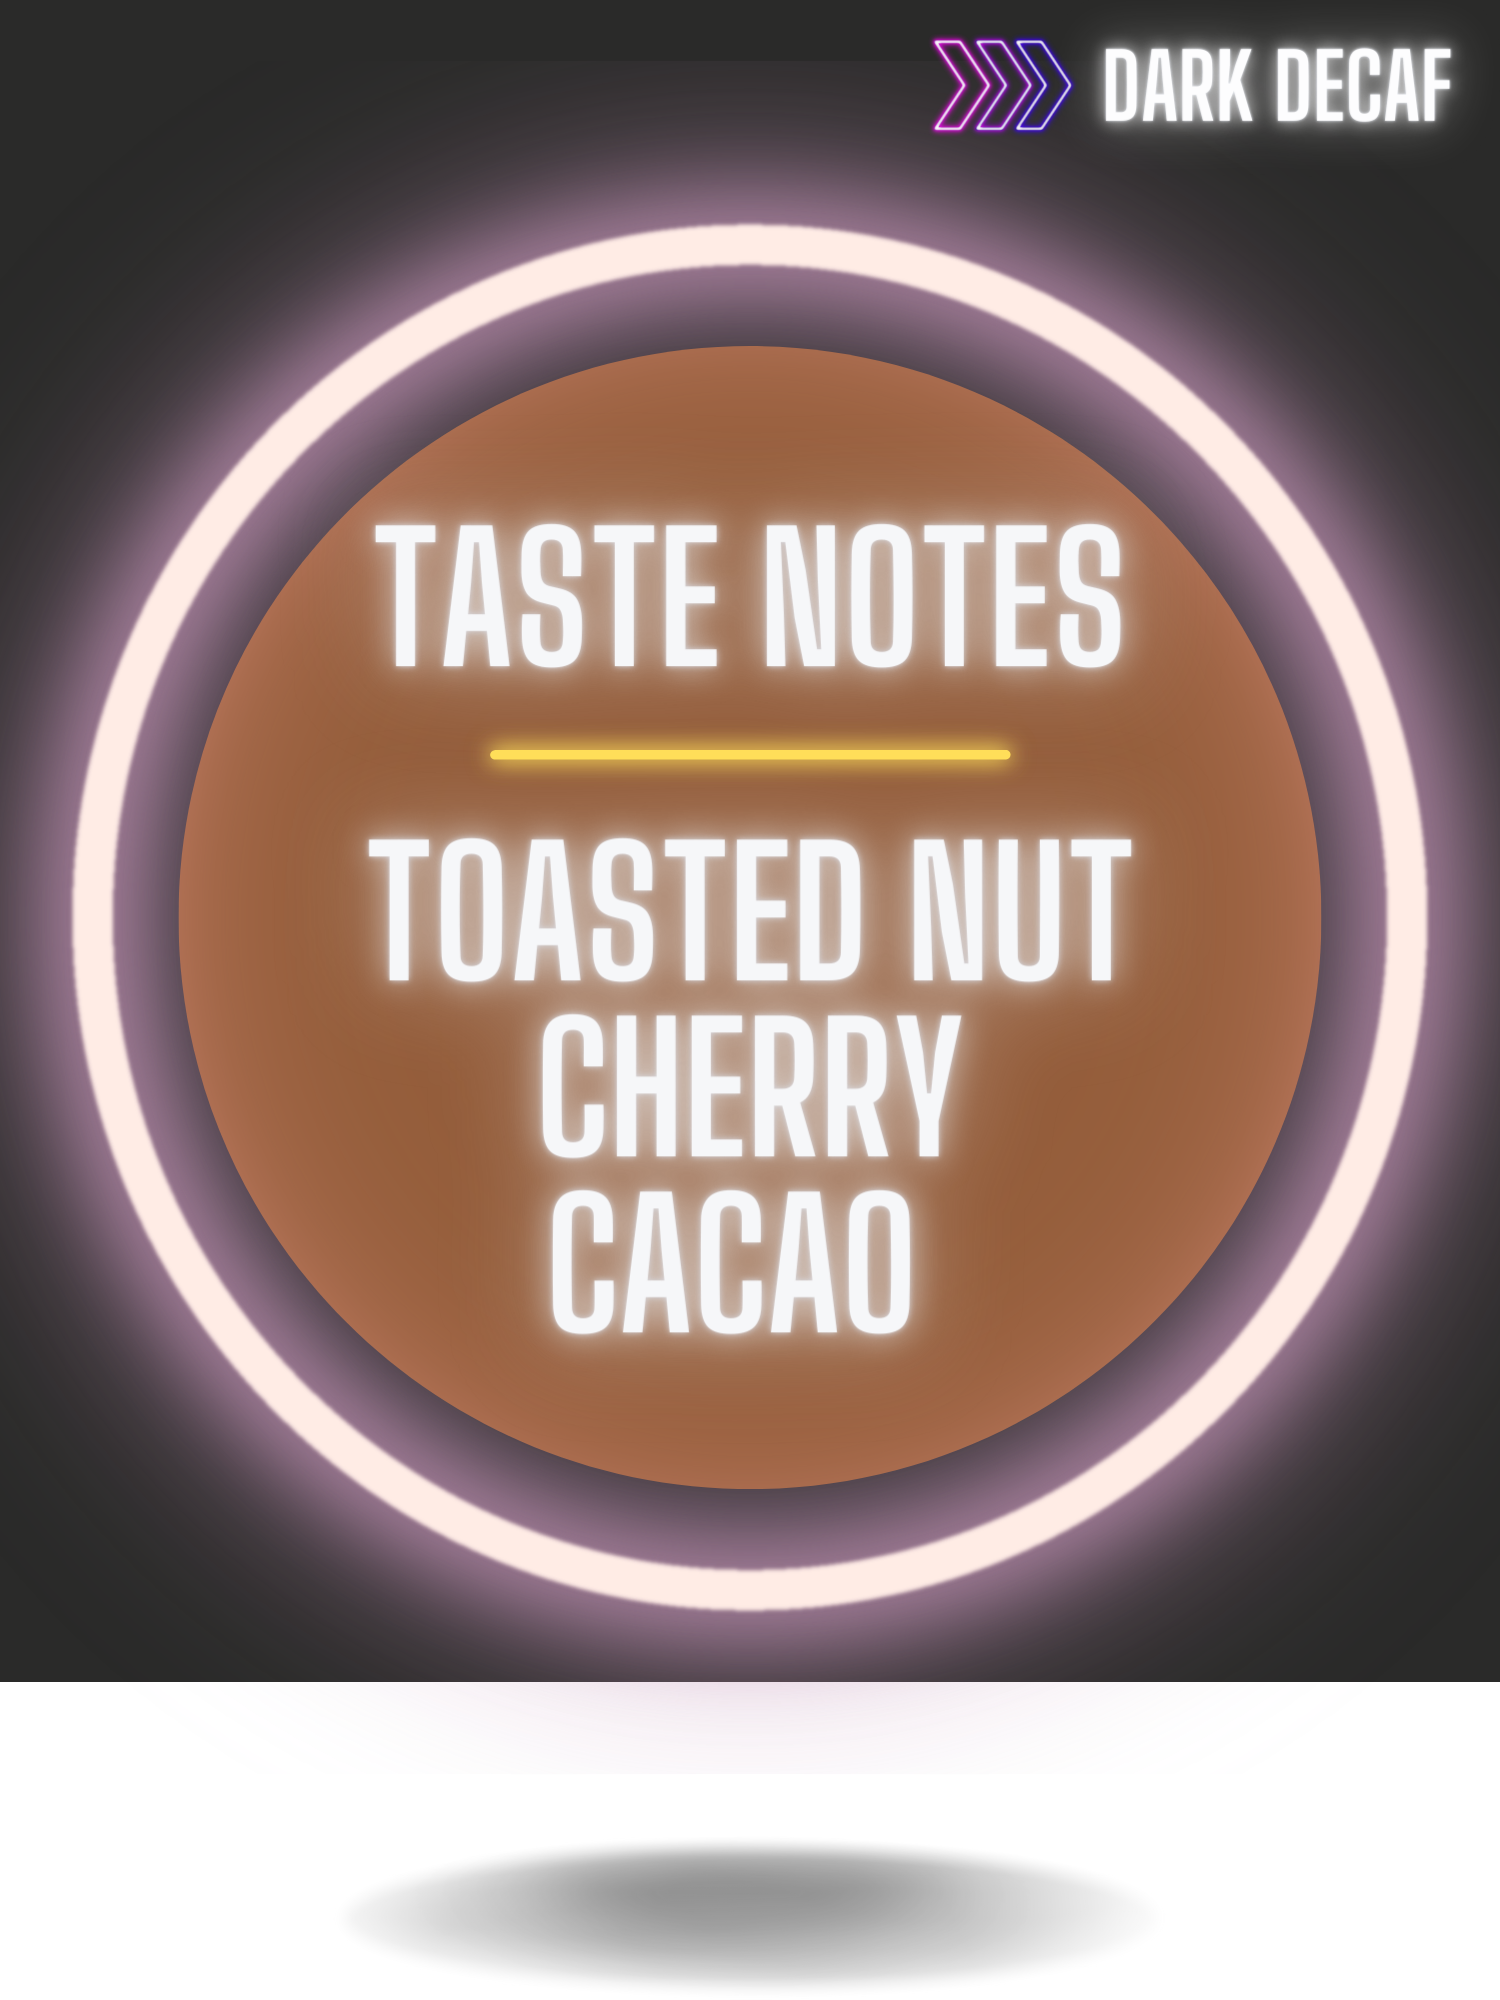 Taste notes of Gigawatt Static Resistor Decaf Water Processed Coffee, Toasted Nut, Cherry, Cacao.